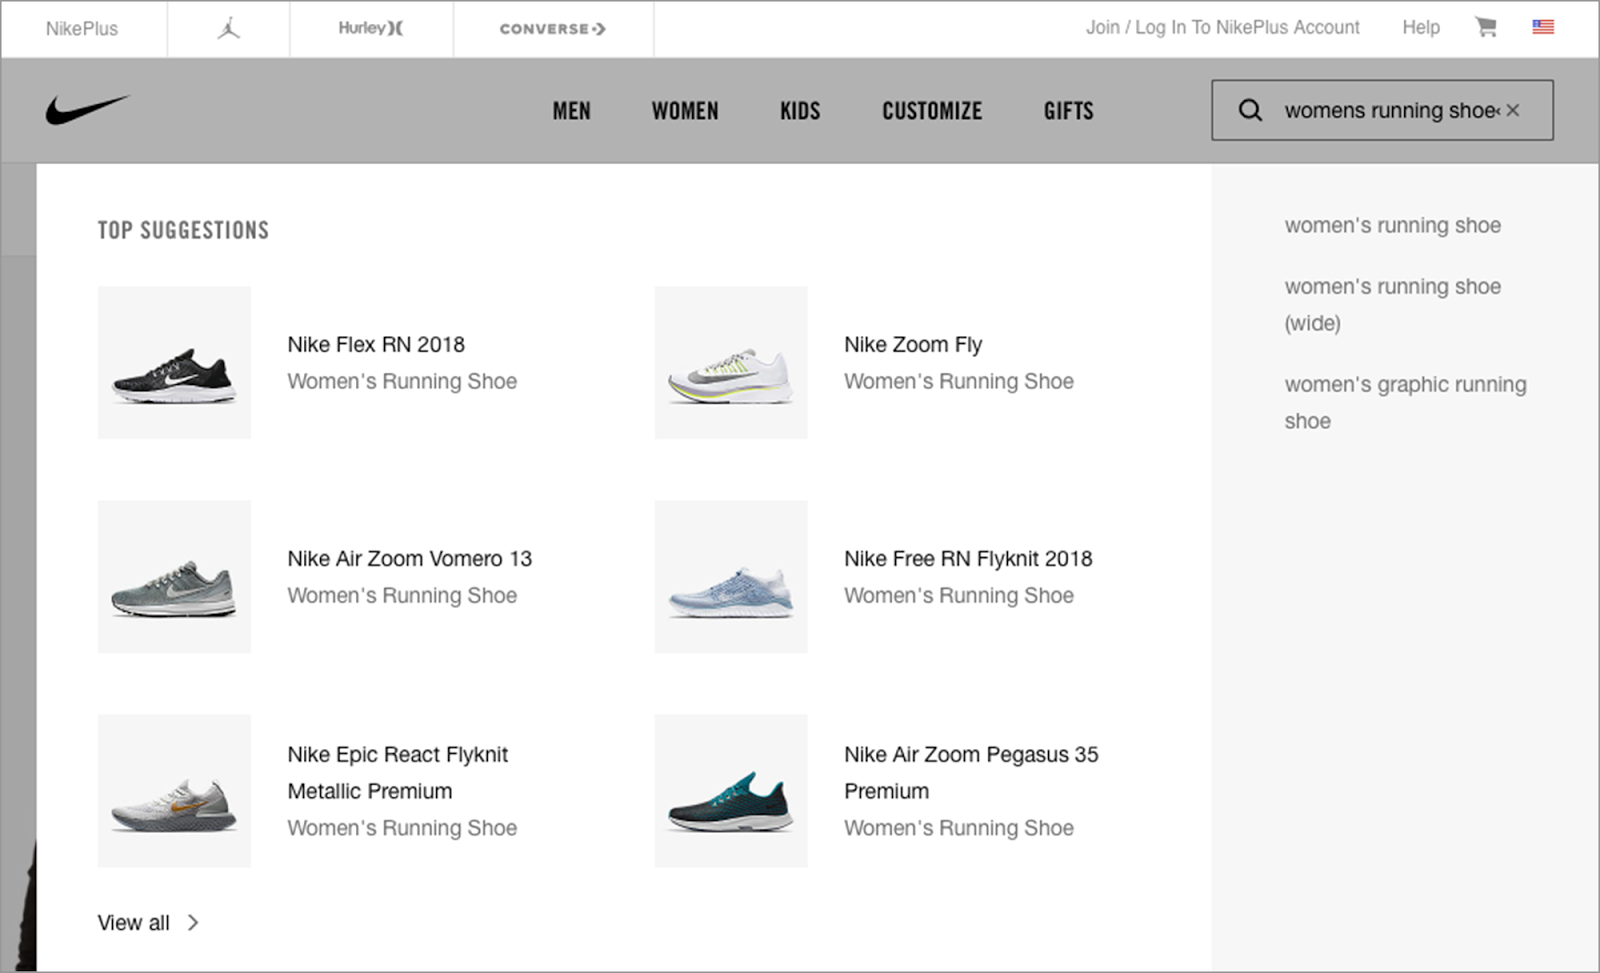 Nike uses a variety product photos matching a user’s search input as part of their visual search results display.